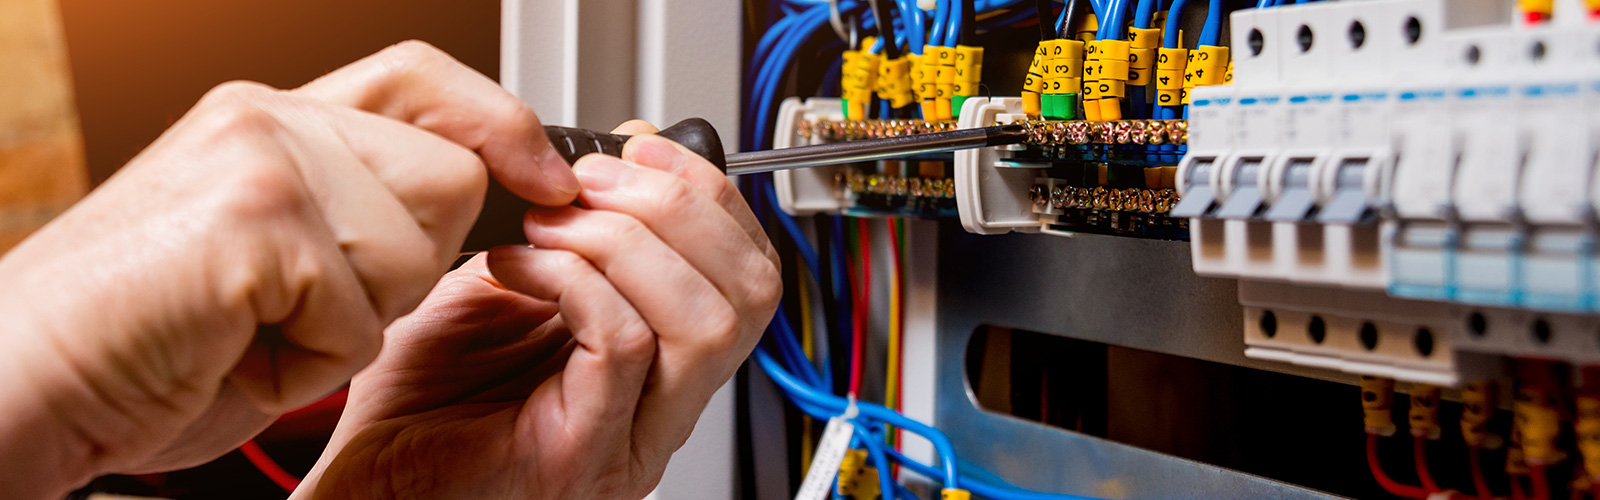 Electrical jobs in essex and suffolk